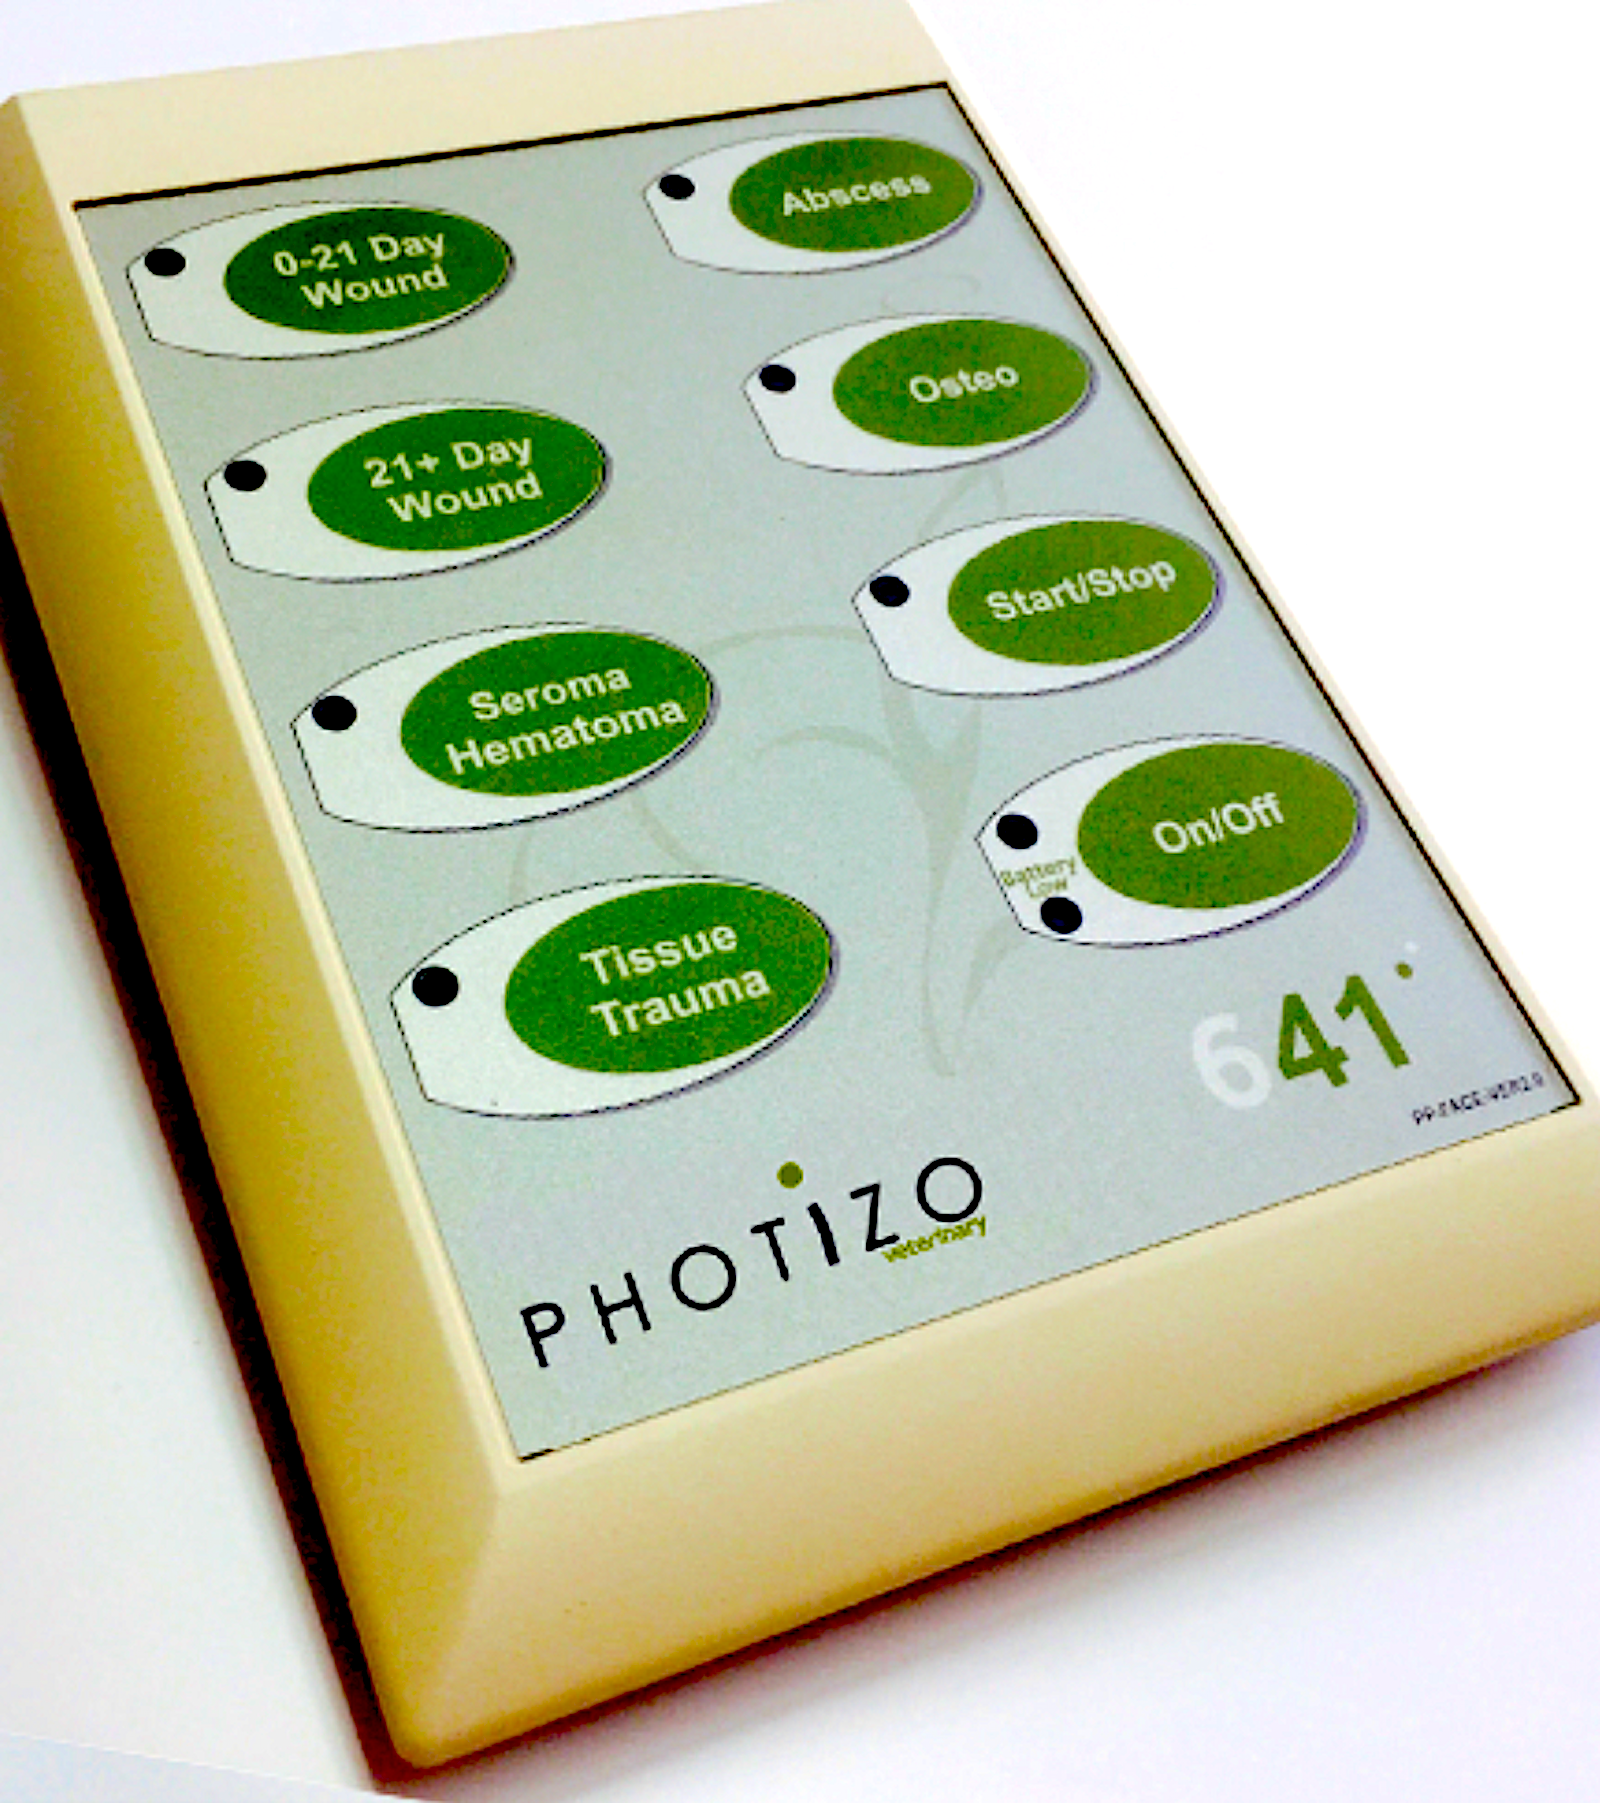 PHOTIZO LIGHT THERAPY-UK: harness the healing power of red and infrared light - Vital Vet